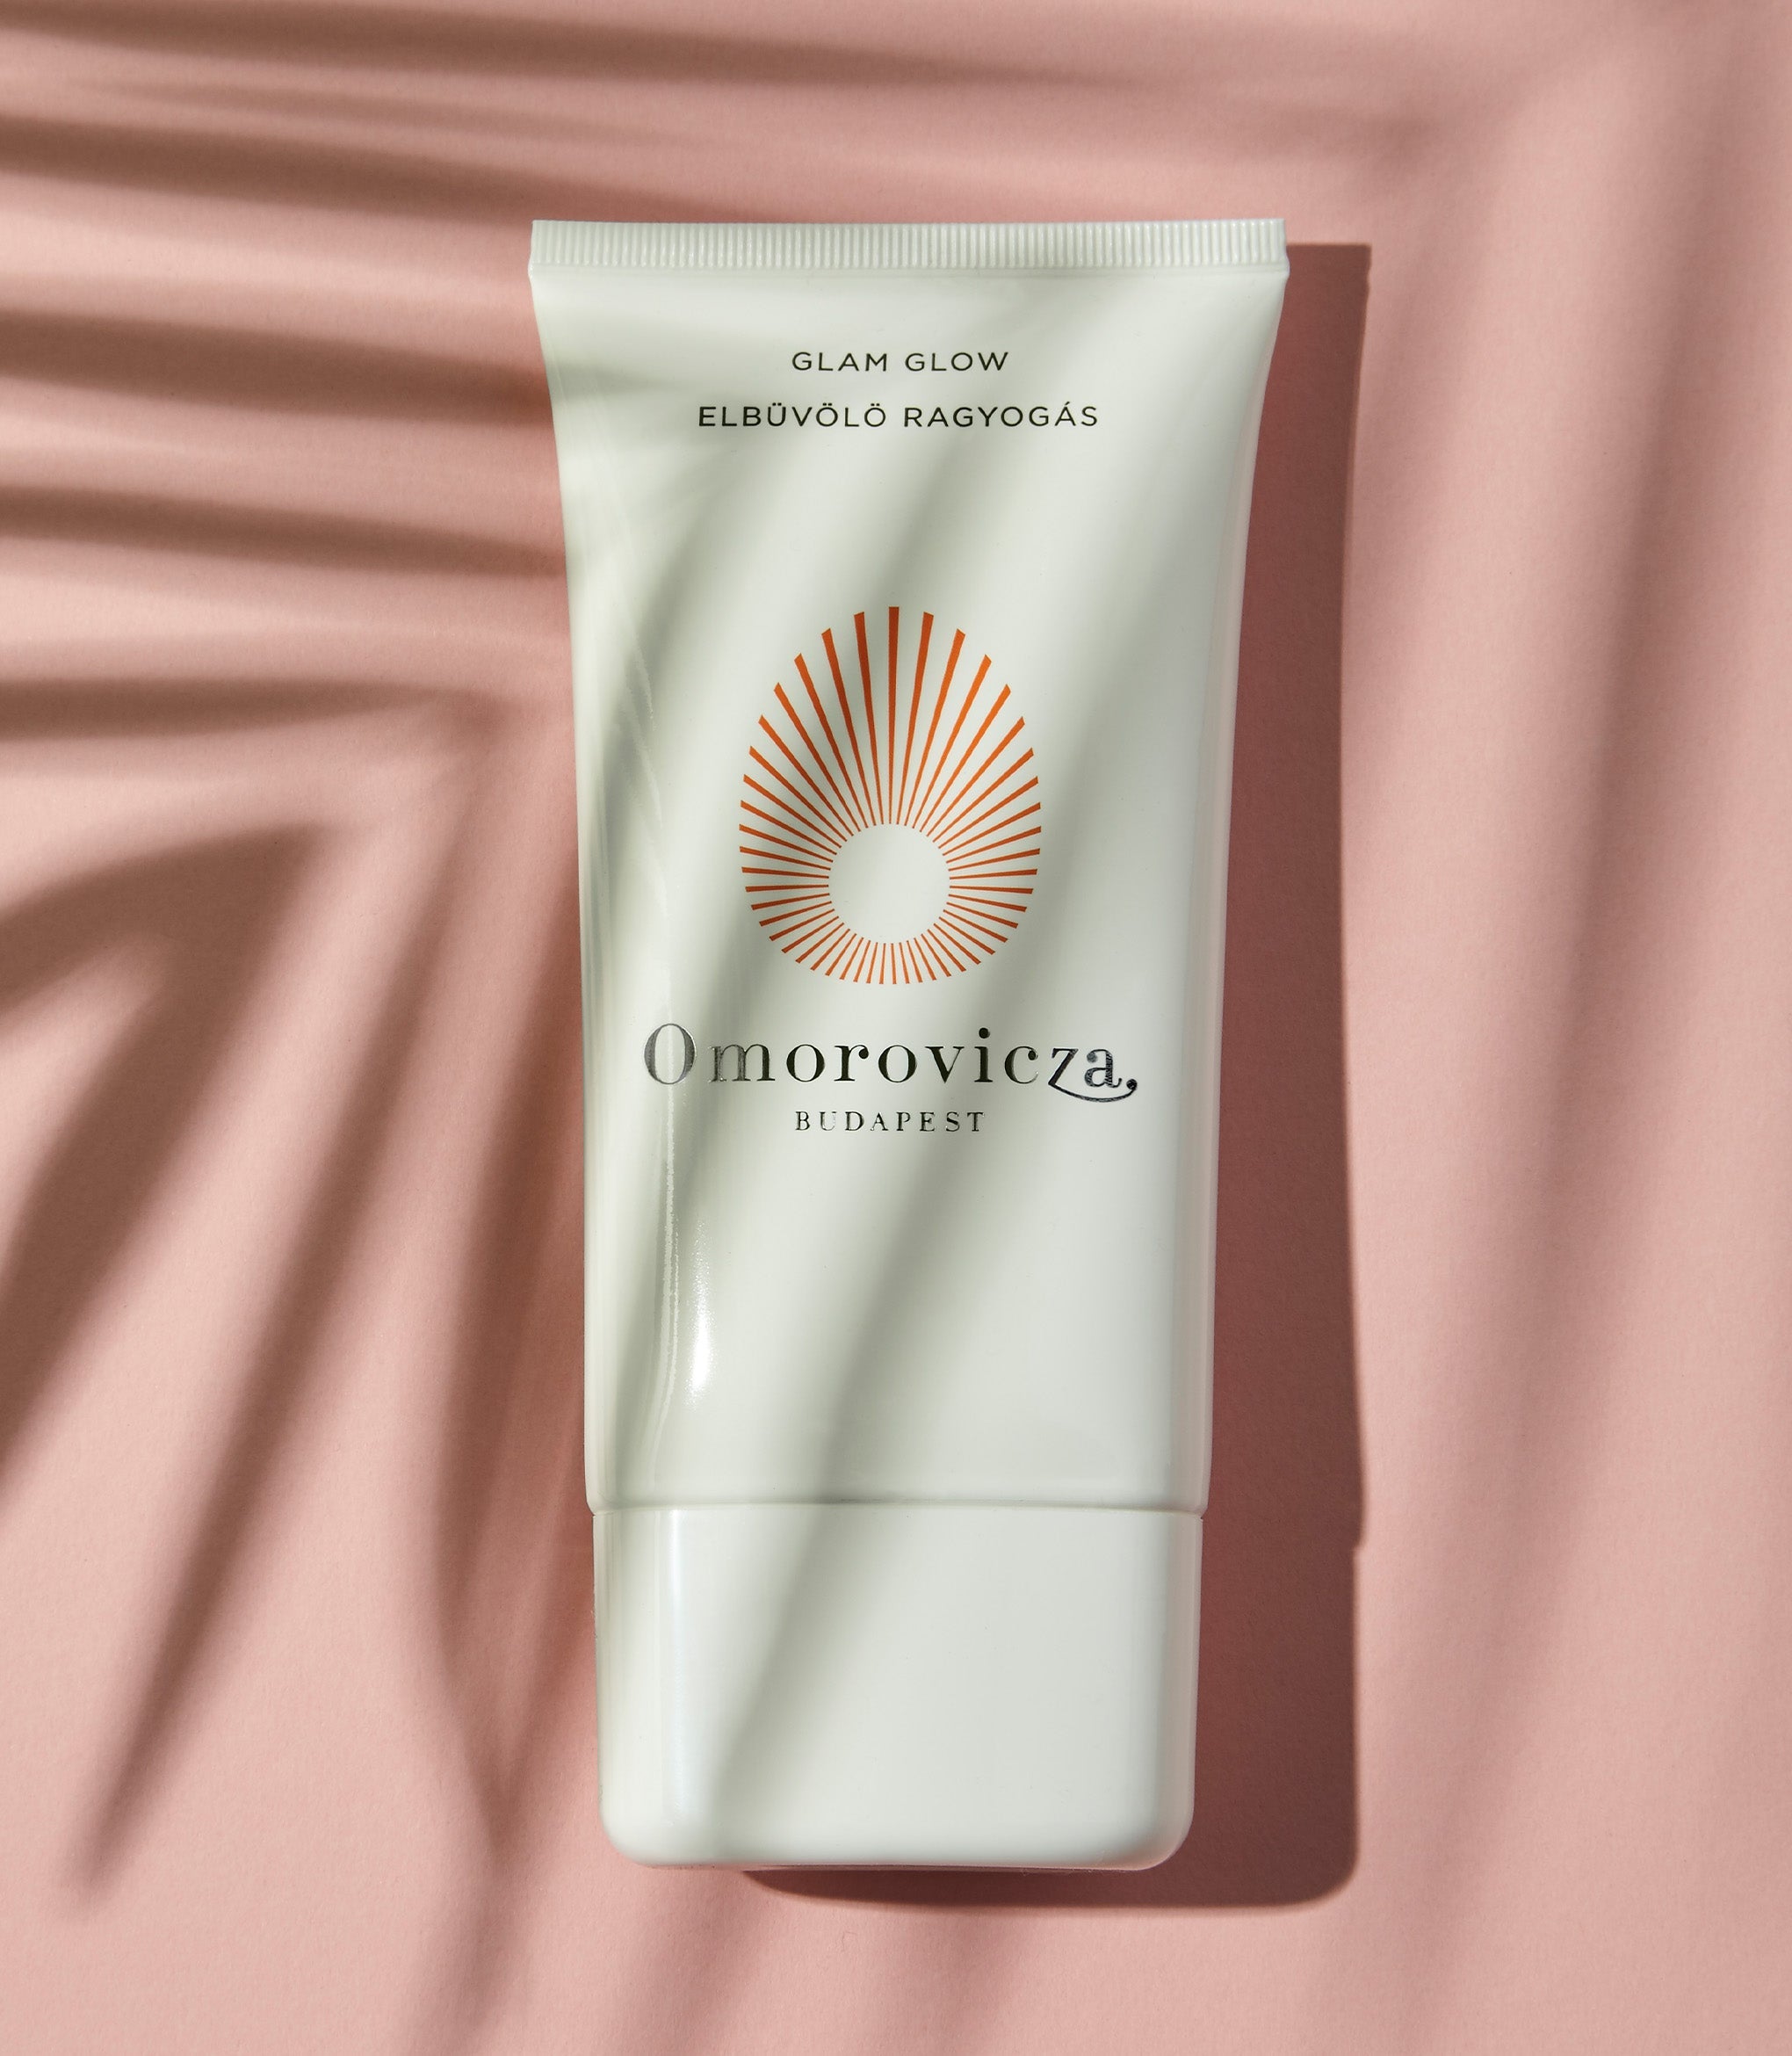 A tube of hydrating, citrus-scented self-tanner Glam Glow on a pink background.